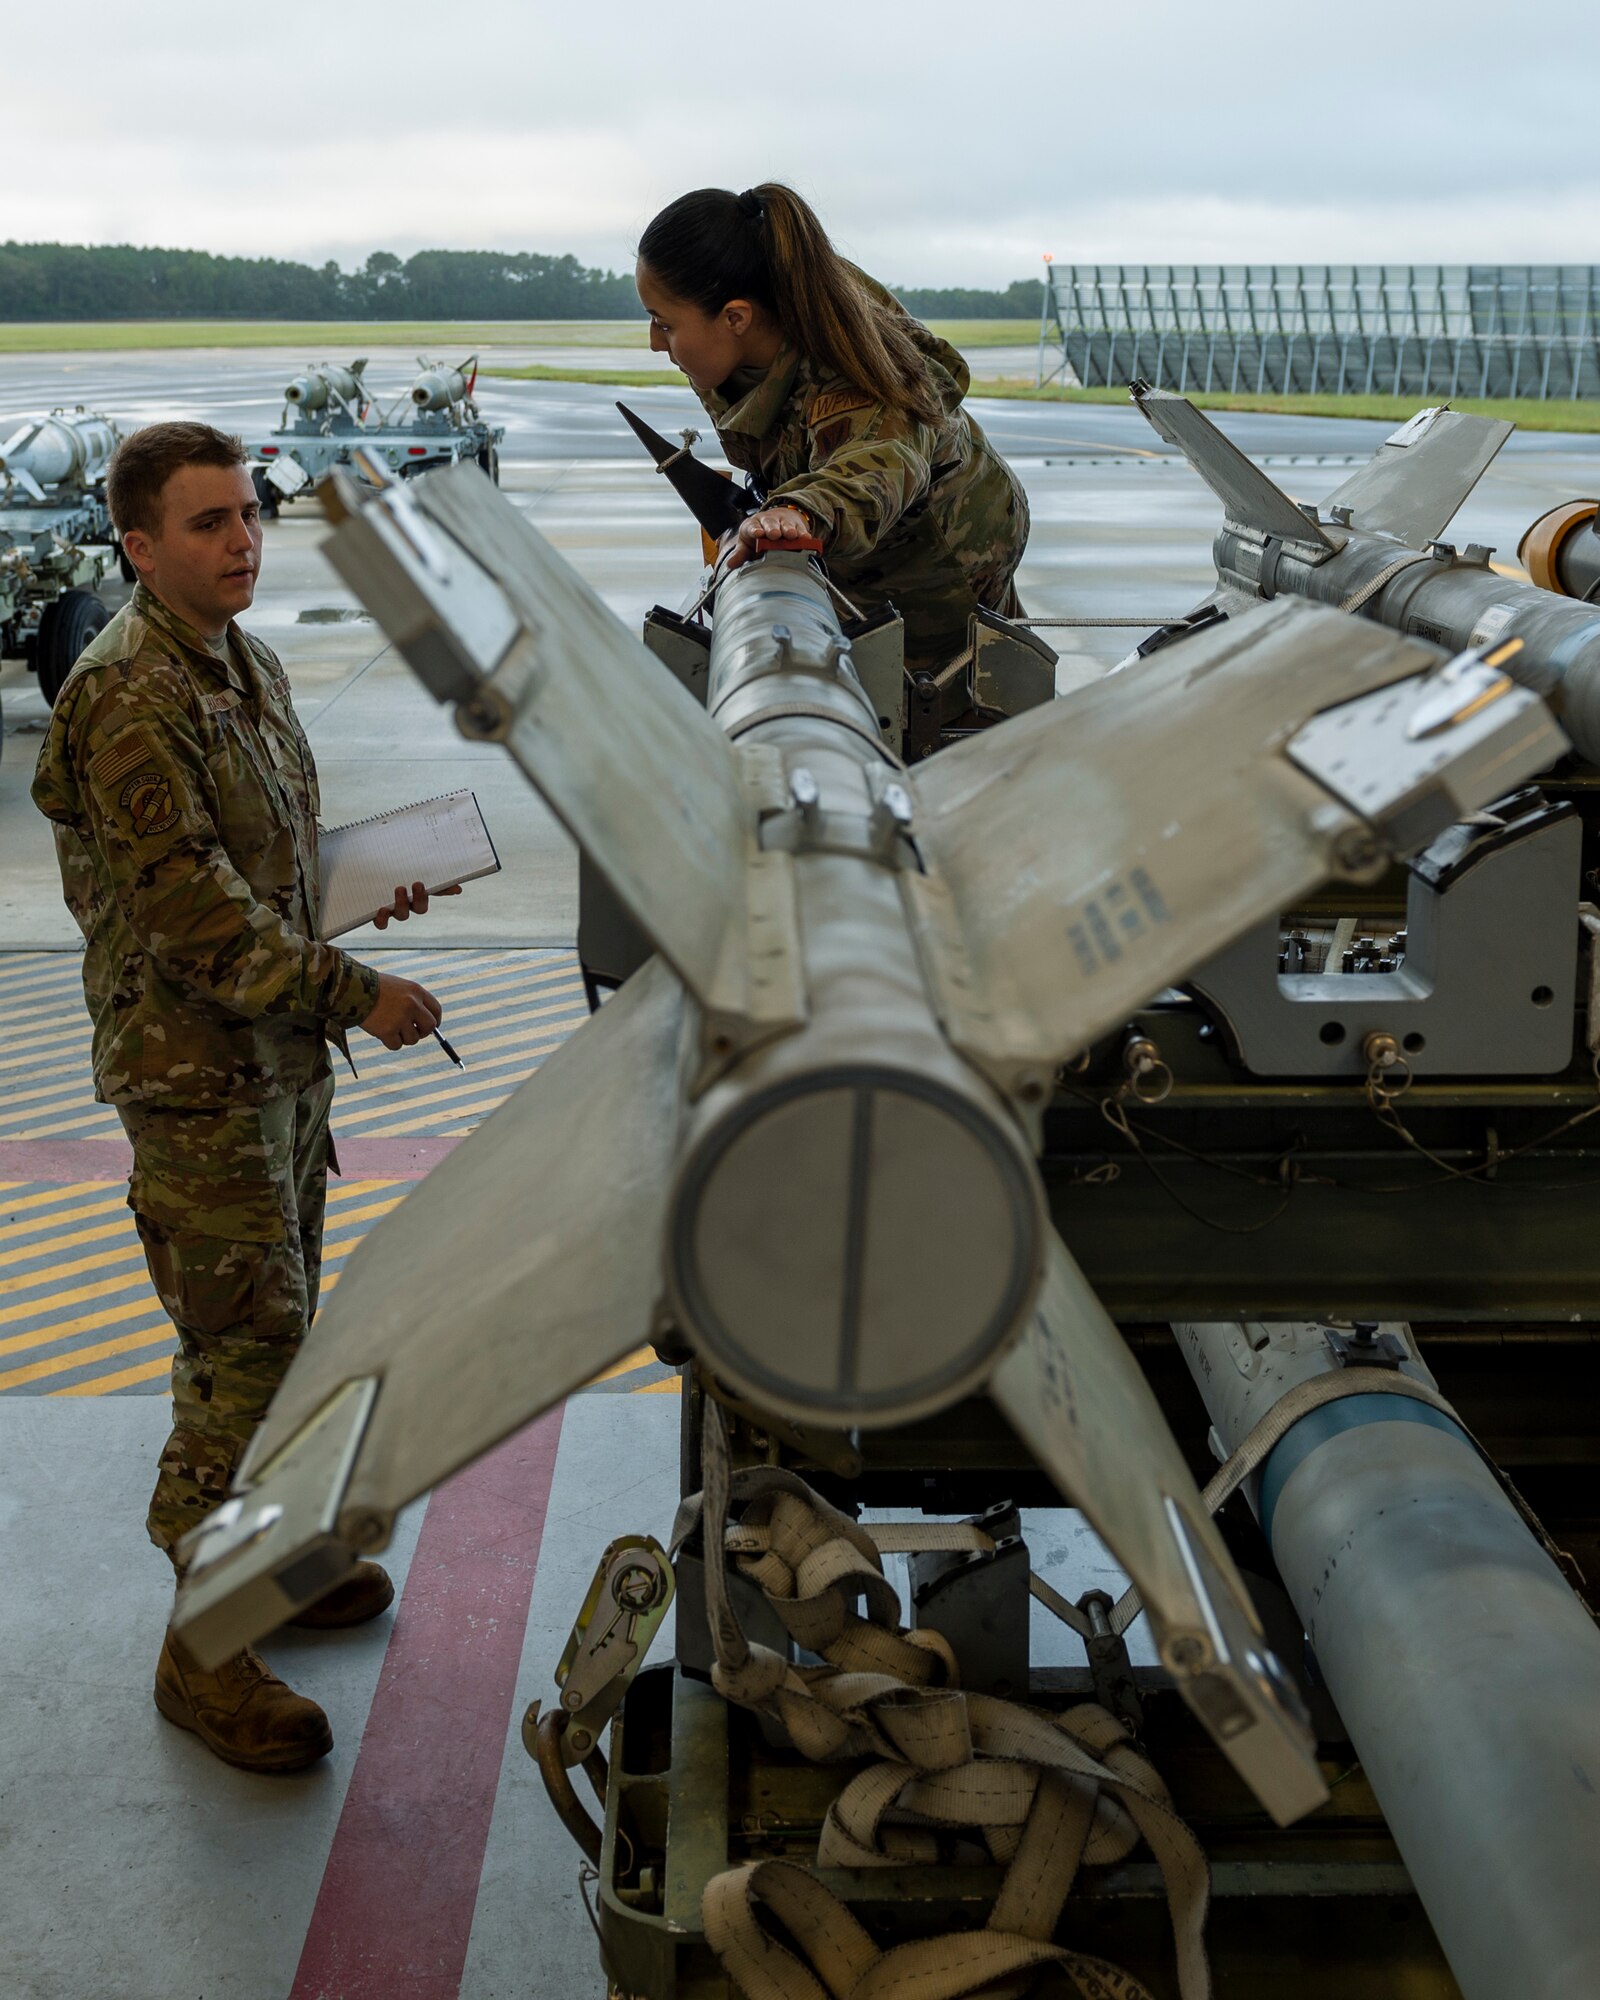 Senior Airman Angelica Diaz, center, Weapons Standardization Squadron lead crewmember, teaches Airman Zachary Harrison, 336th Fighter Generation Squadron load crew technician, about the AIM-9 Sidewinder missile at Seymour Johnson Air Force Base, North Carolina, Oct. 12, 2021.